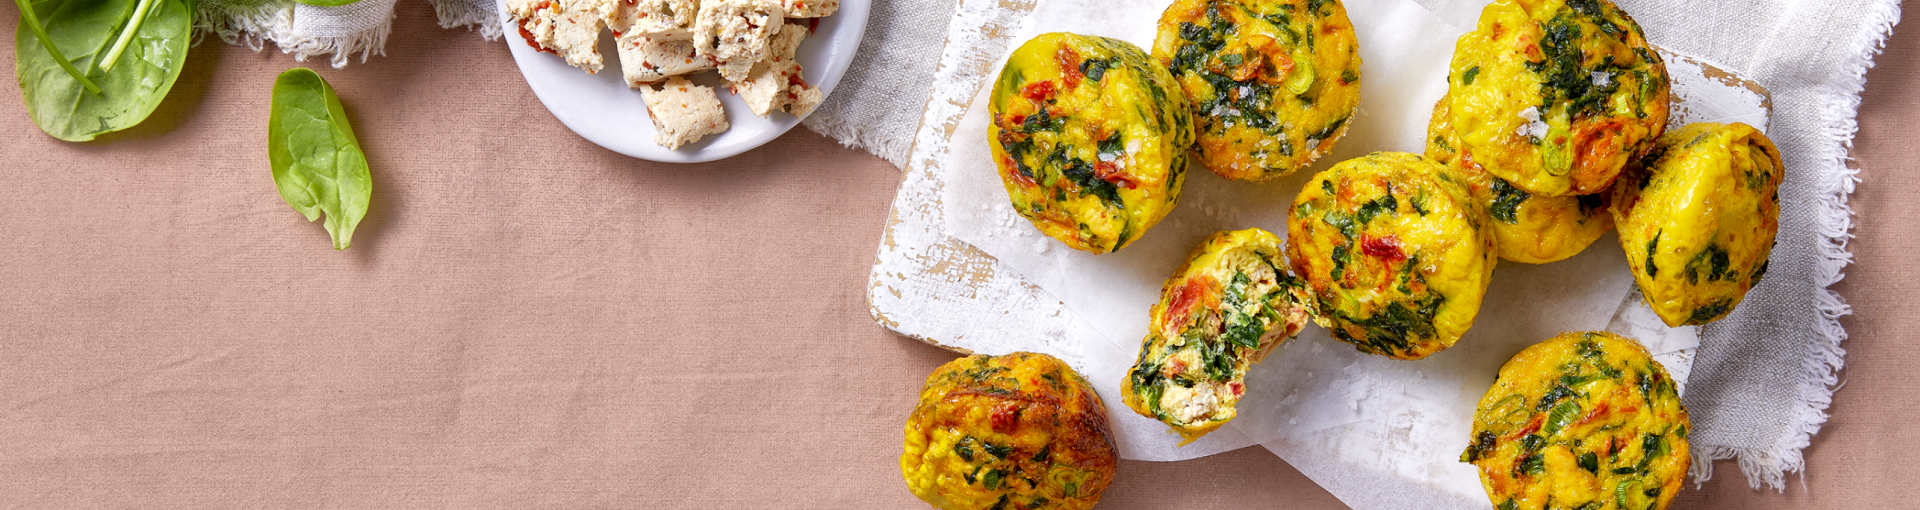 Mini Frittatas with Spinach and Sundried Tomato